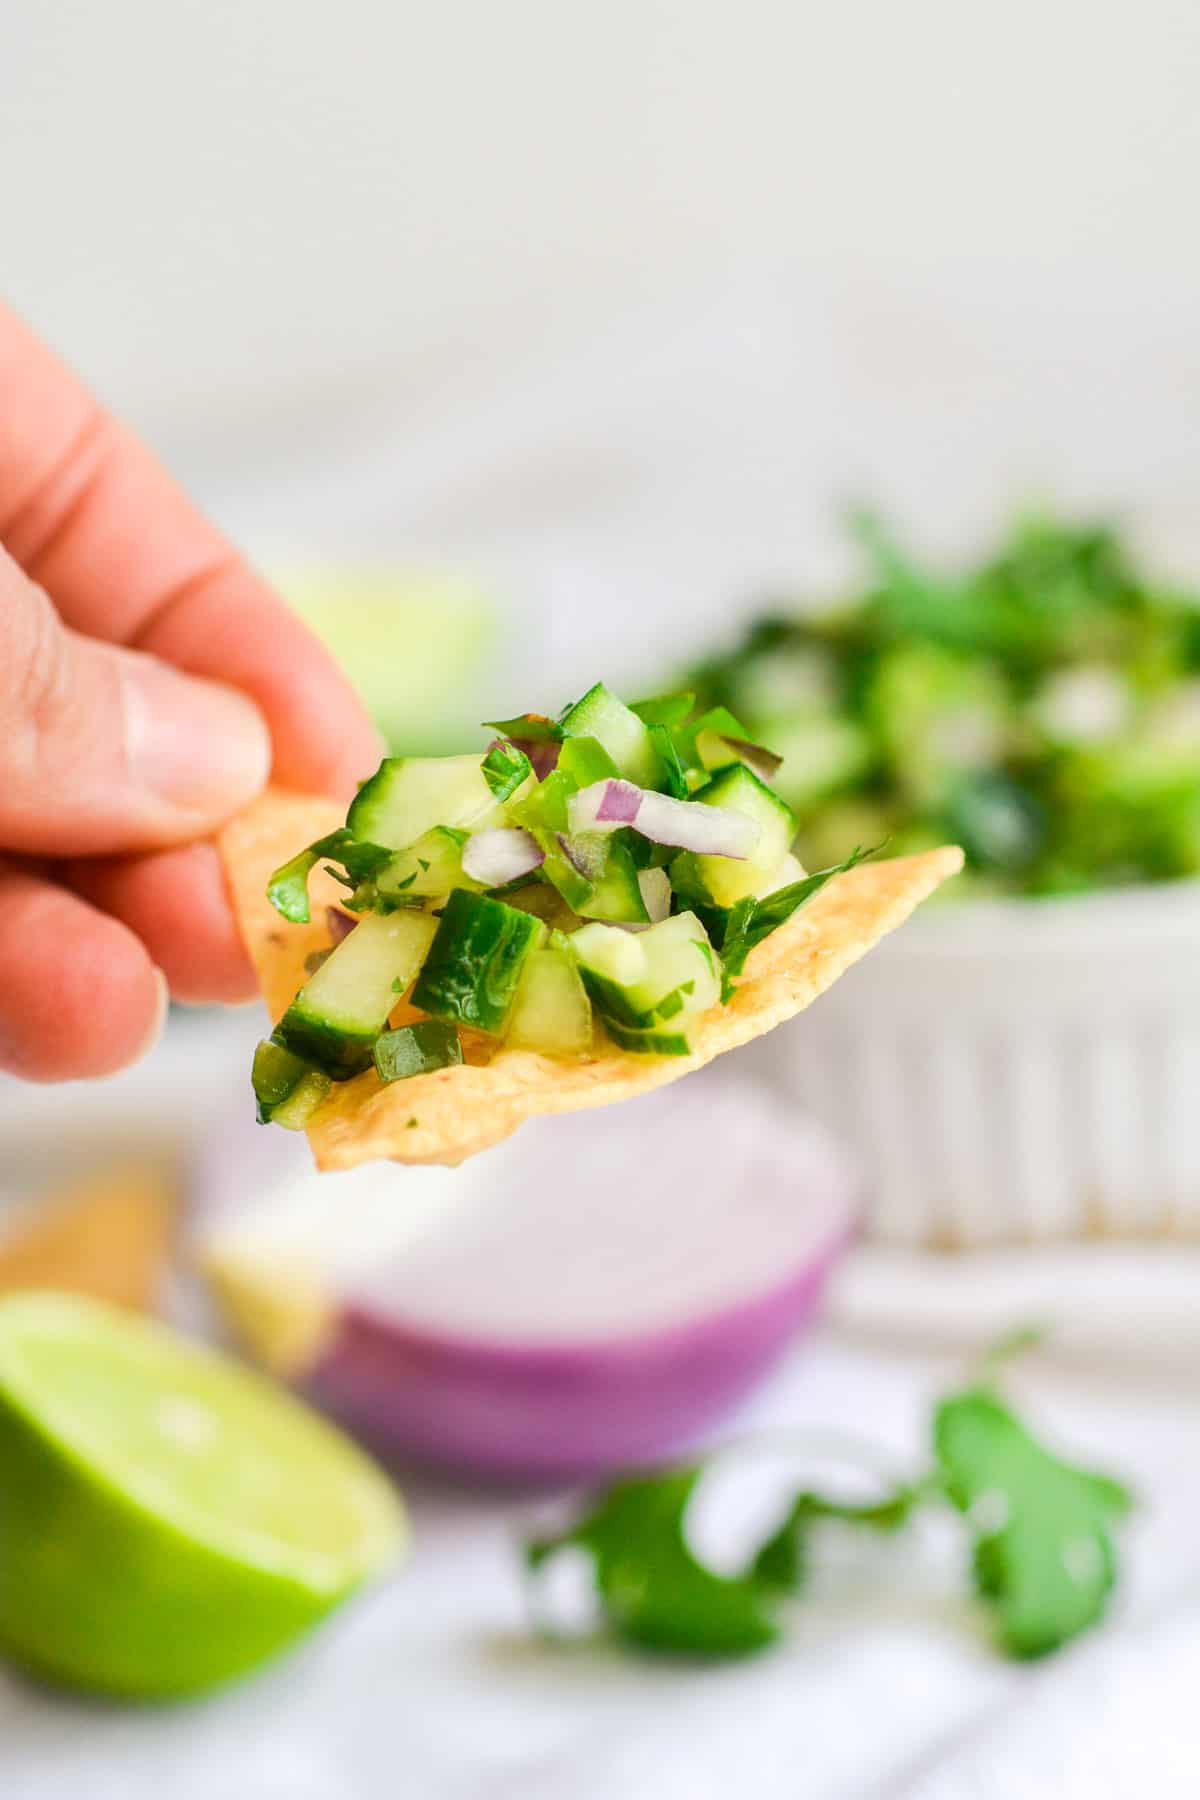 A hand holding a tortilla chip with cucumber pico de gallo on it.